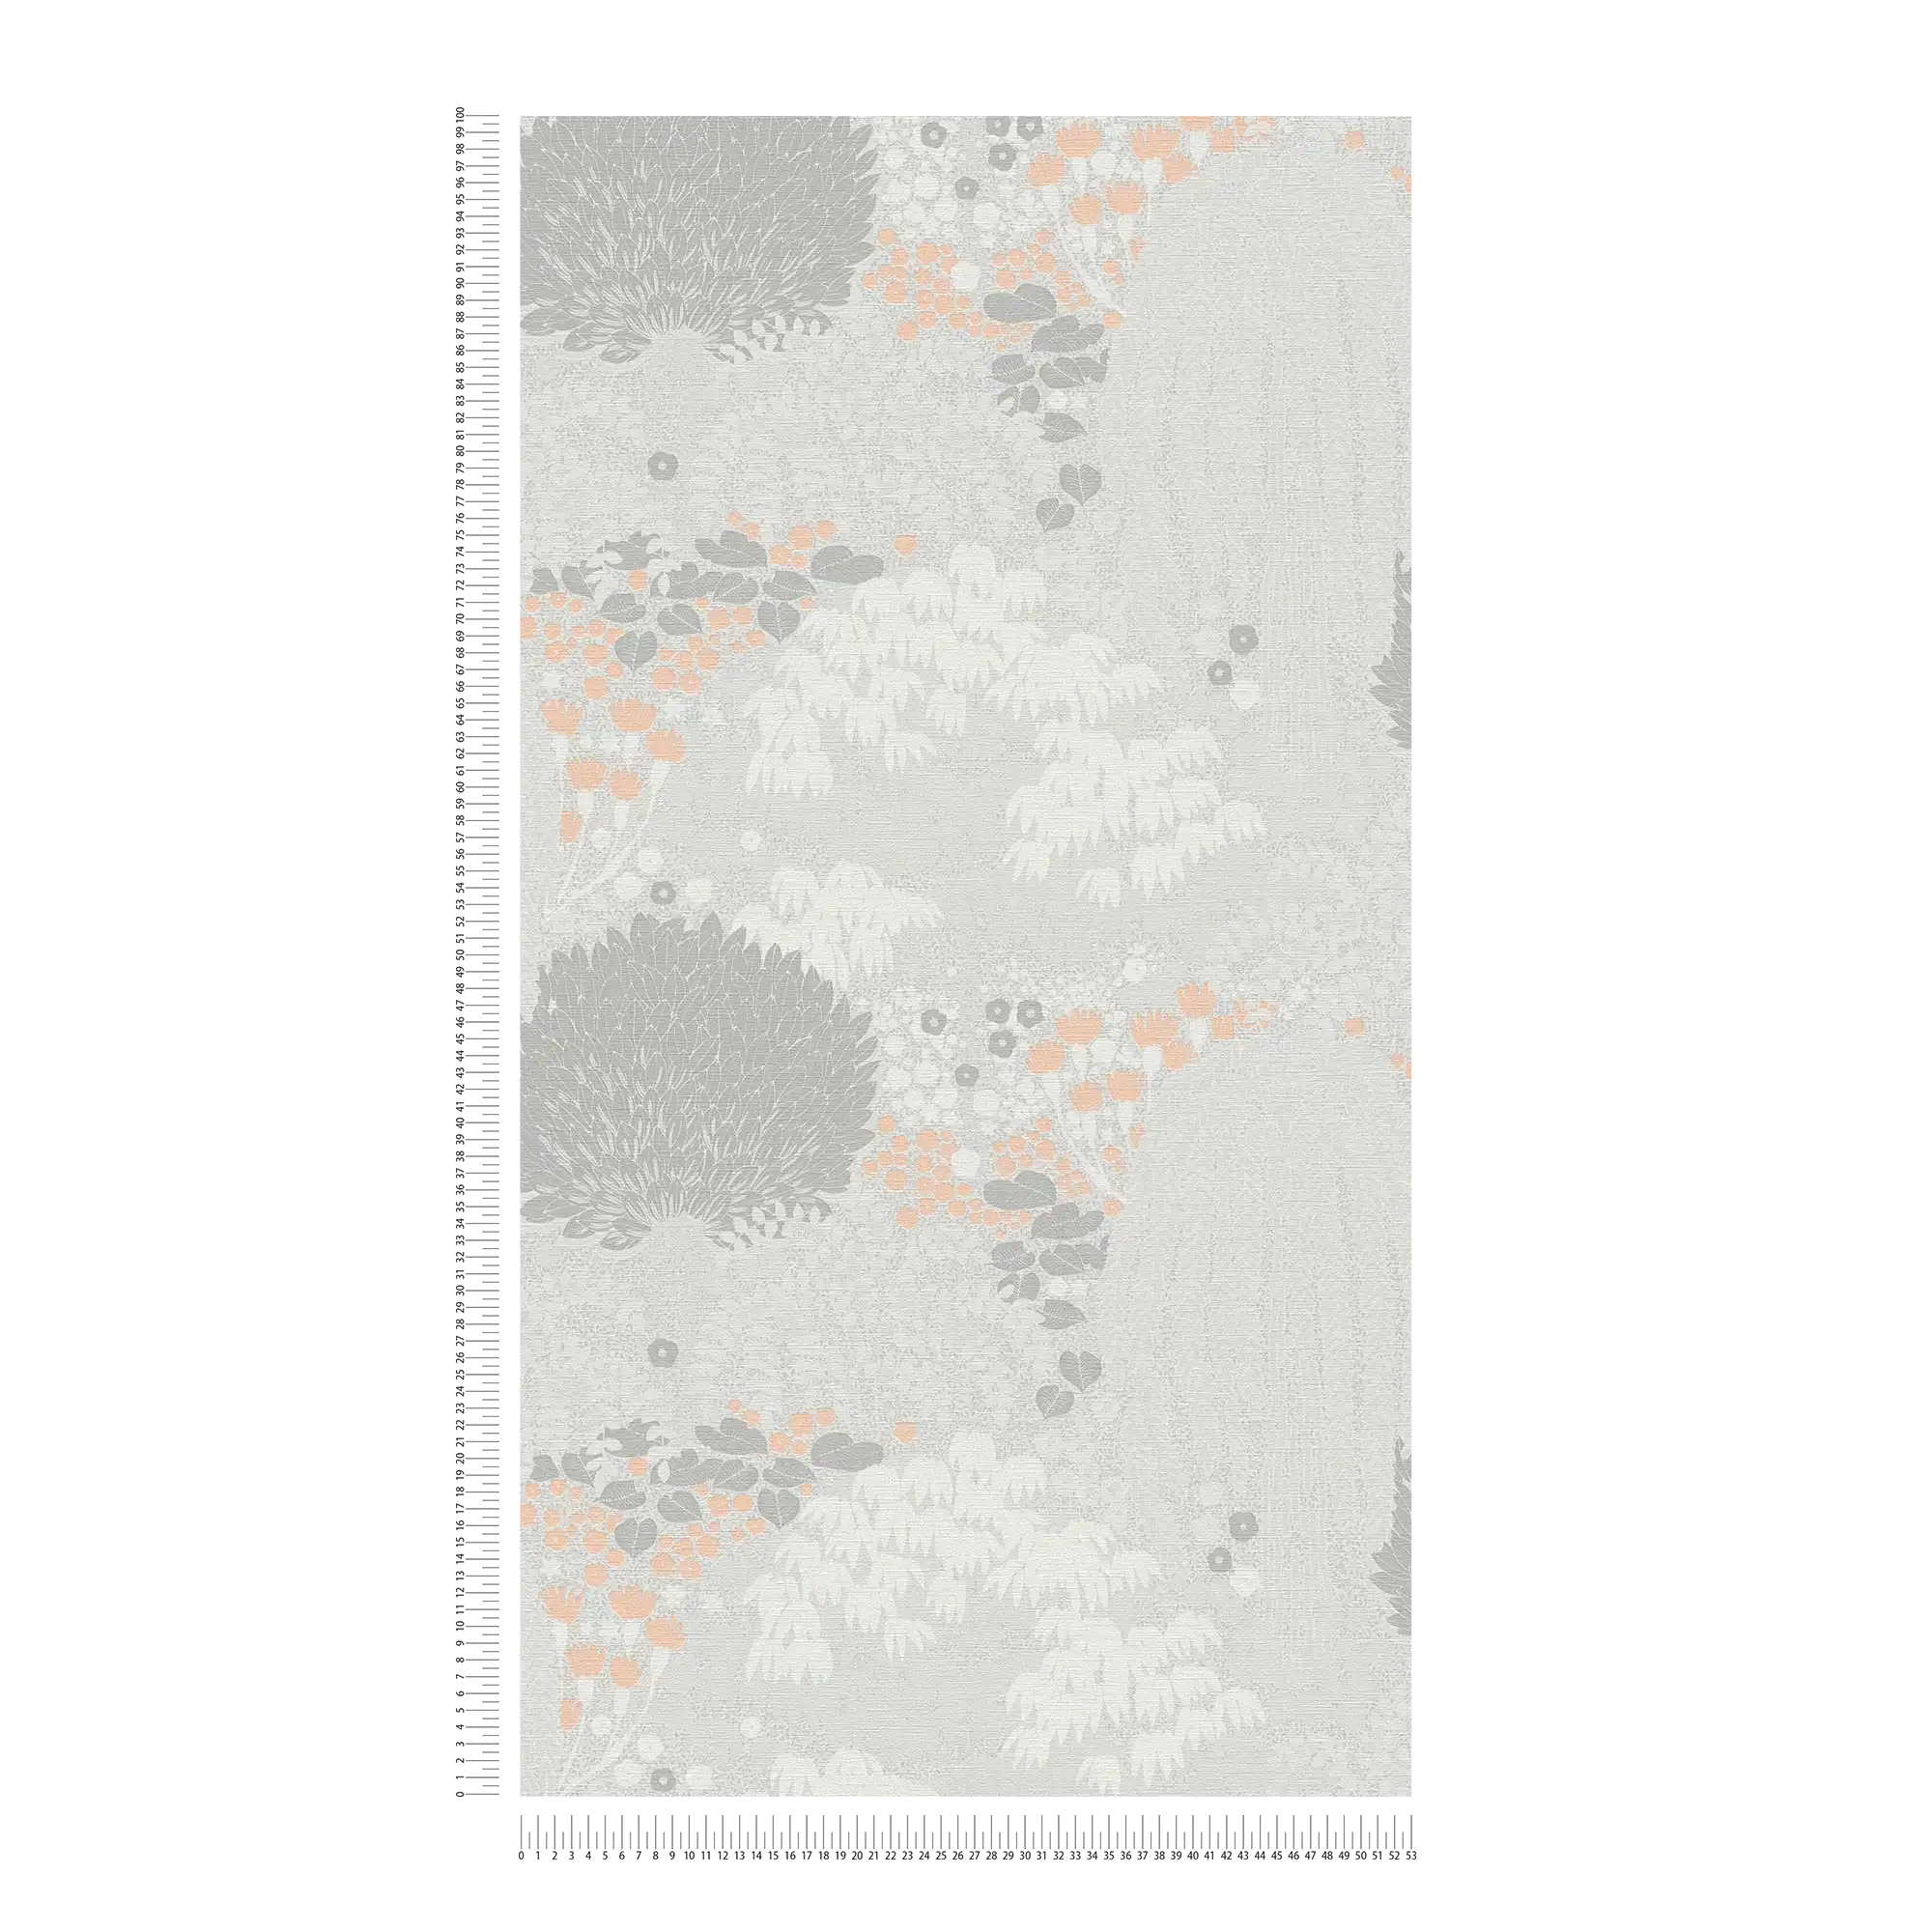             Floral non-woven wallpaper with leaves light textured, matt - light grey, white, pink
        